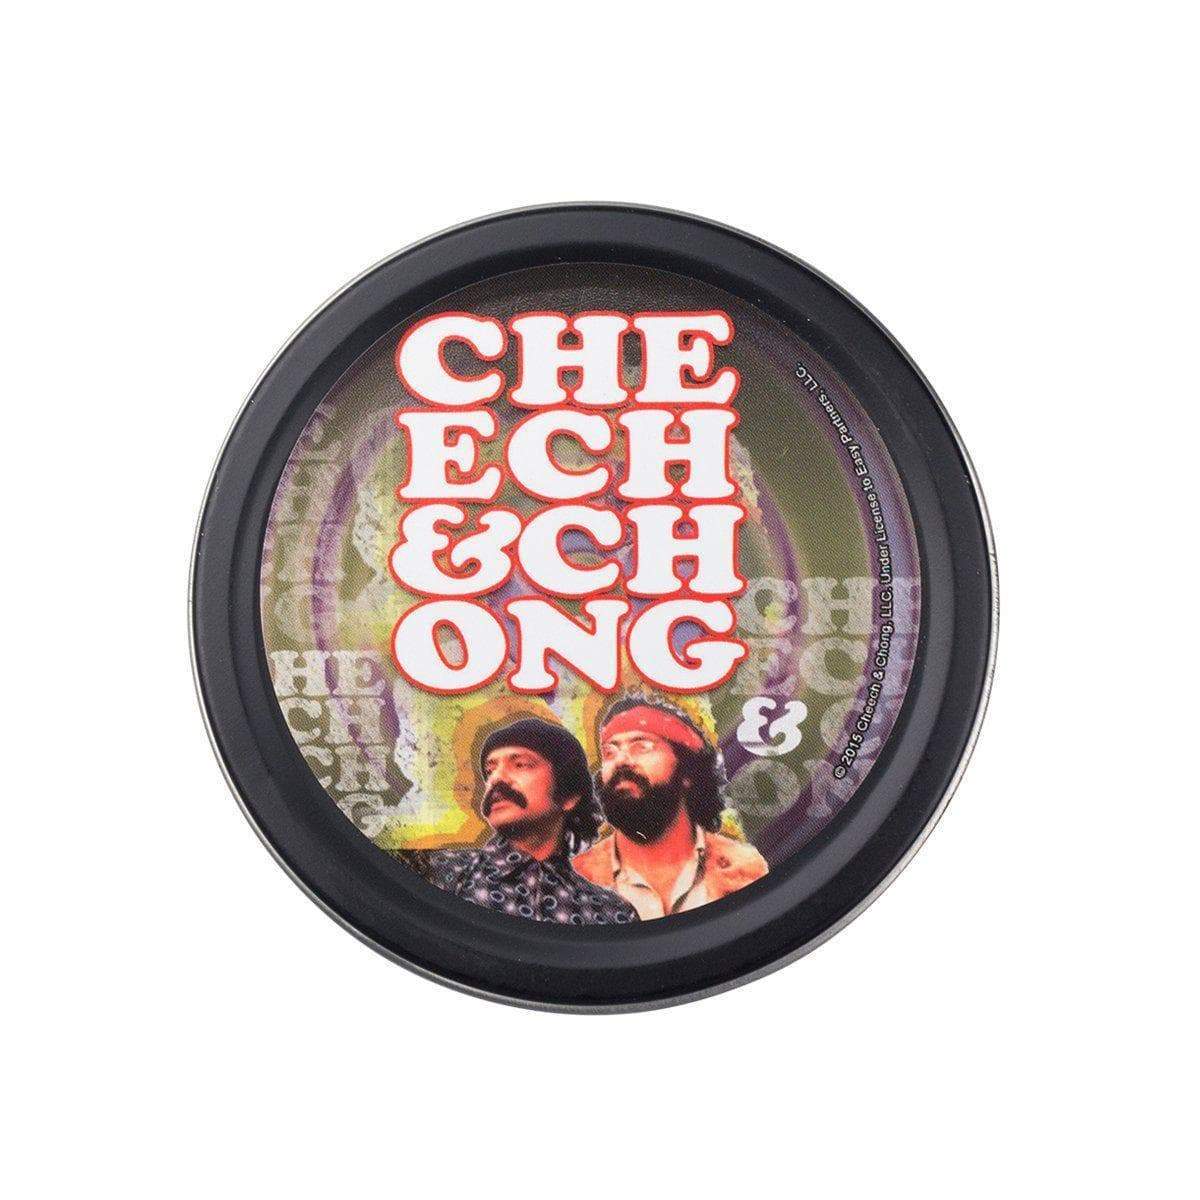 Wonderful pocket-ready round stashbox small tin container with funny comedy duo Cheech and Chong design on lid vintage look